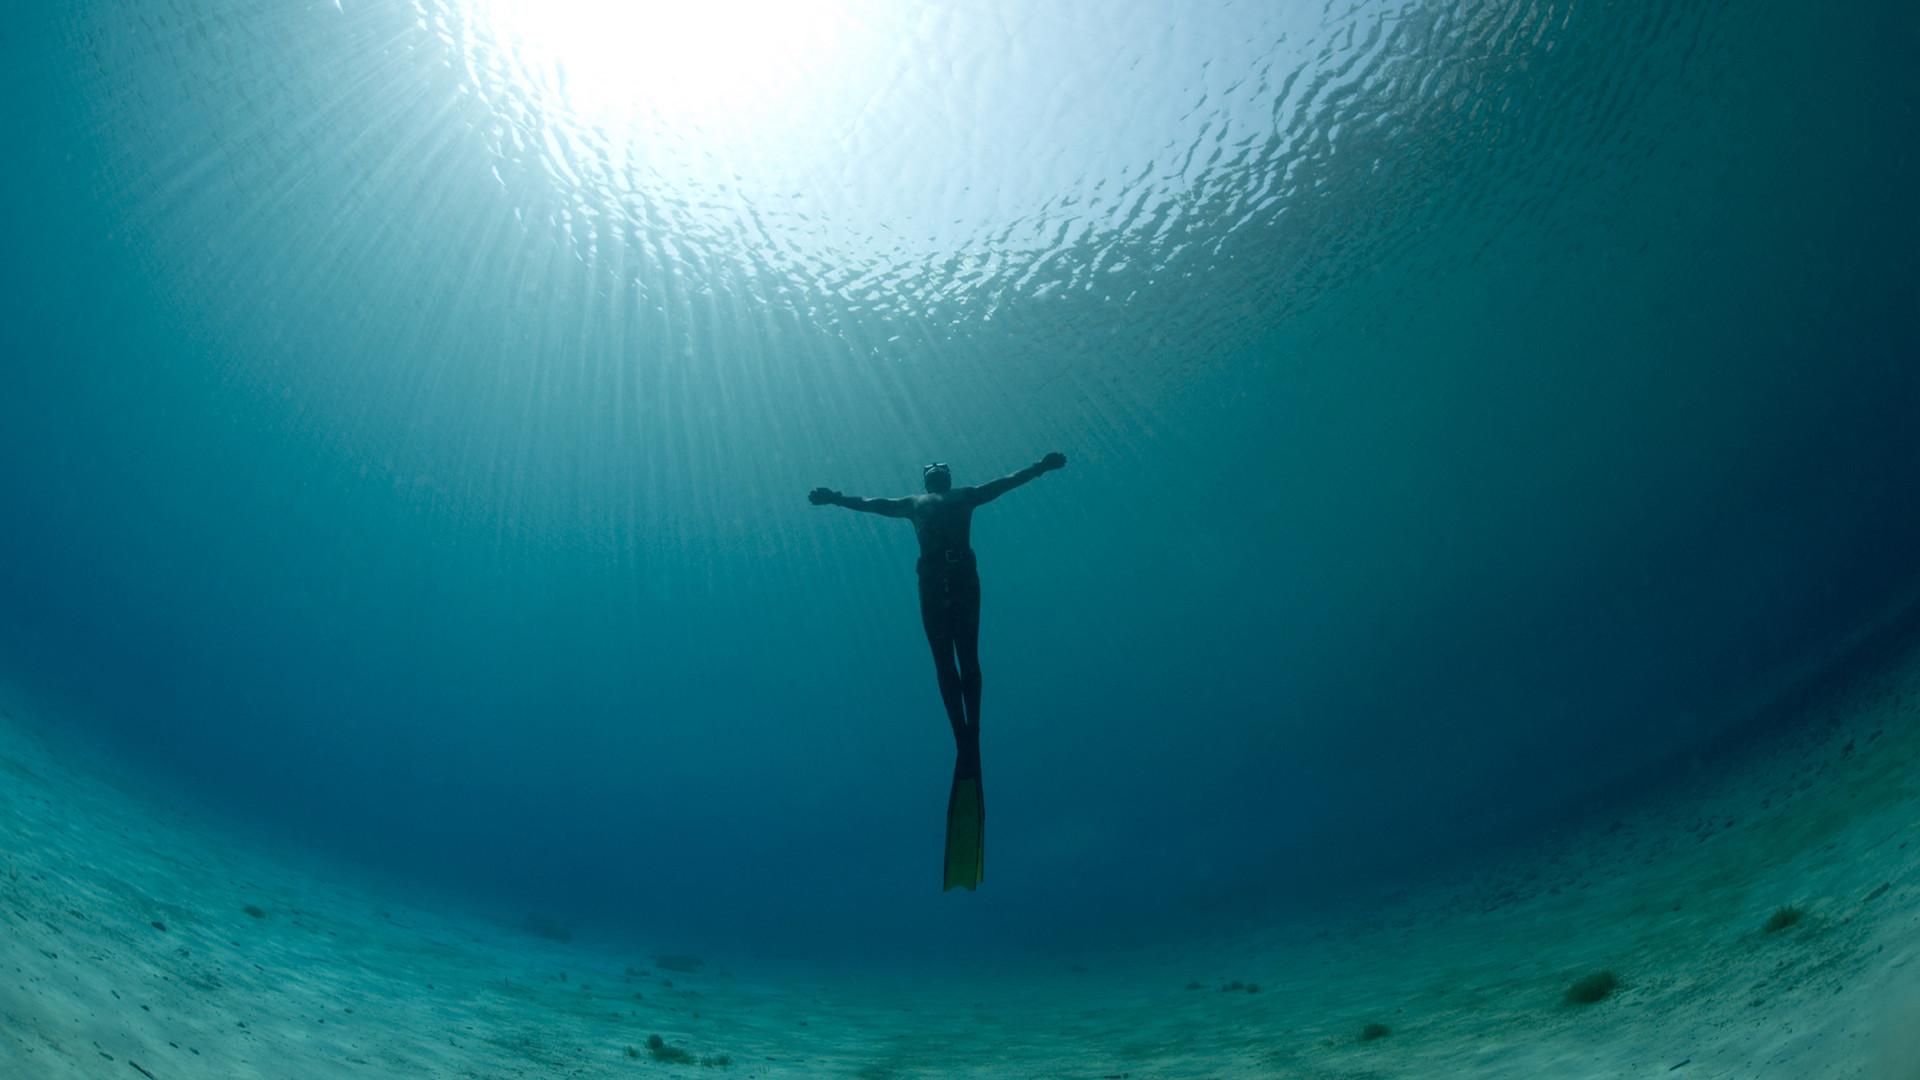 Freediving Wallpaper , Find HD Wallpaper For Free